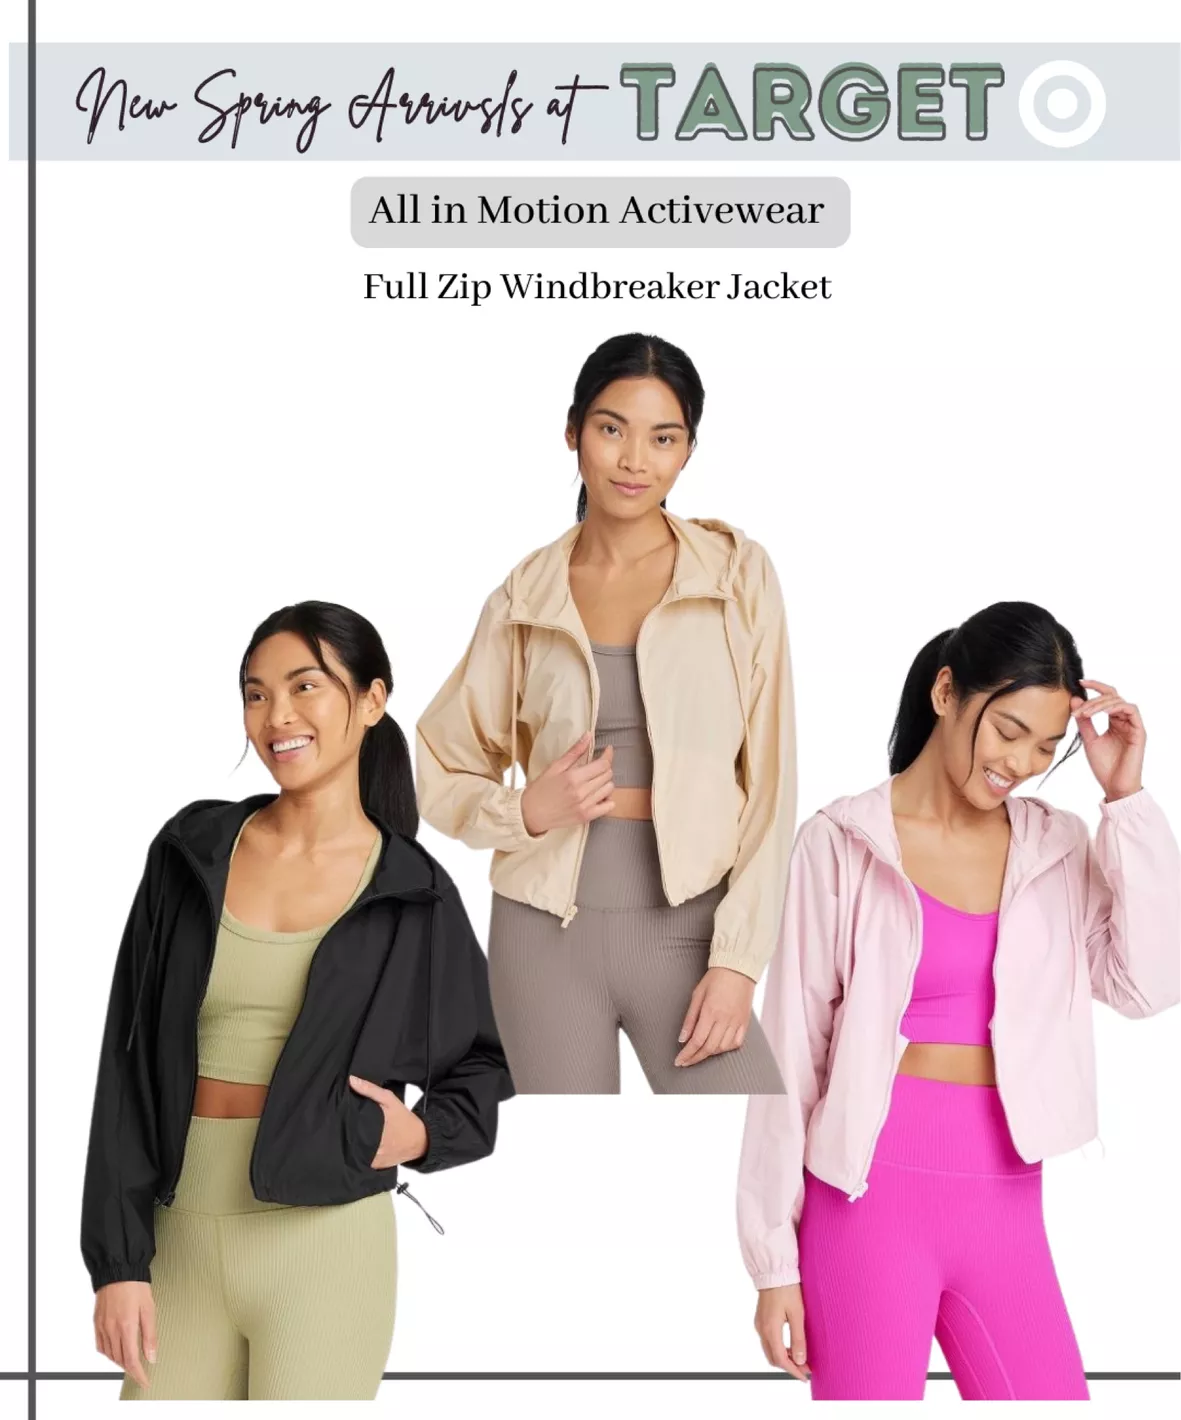 All In Motion Activewear Line Now Available at Target